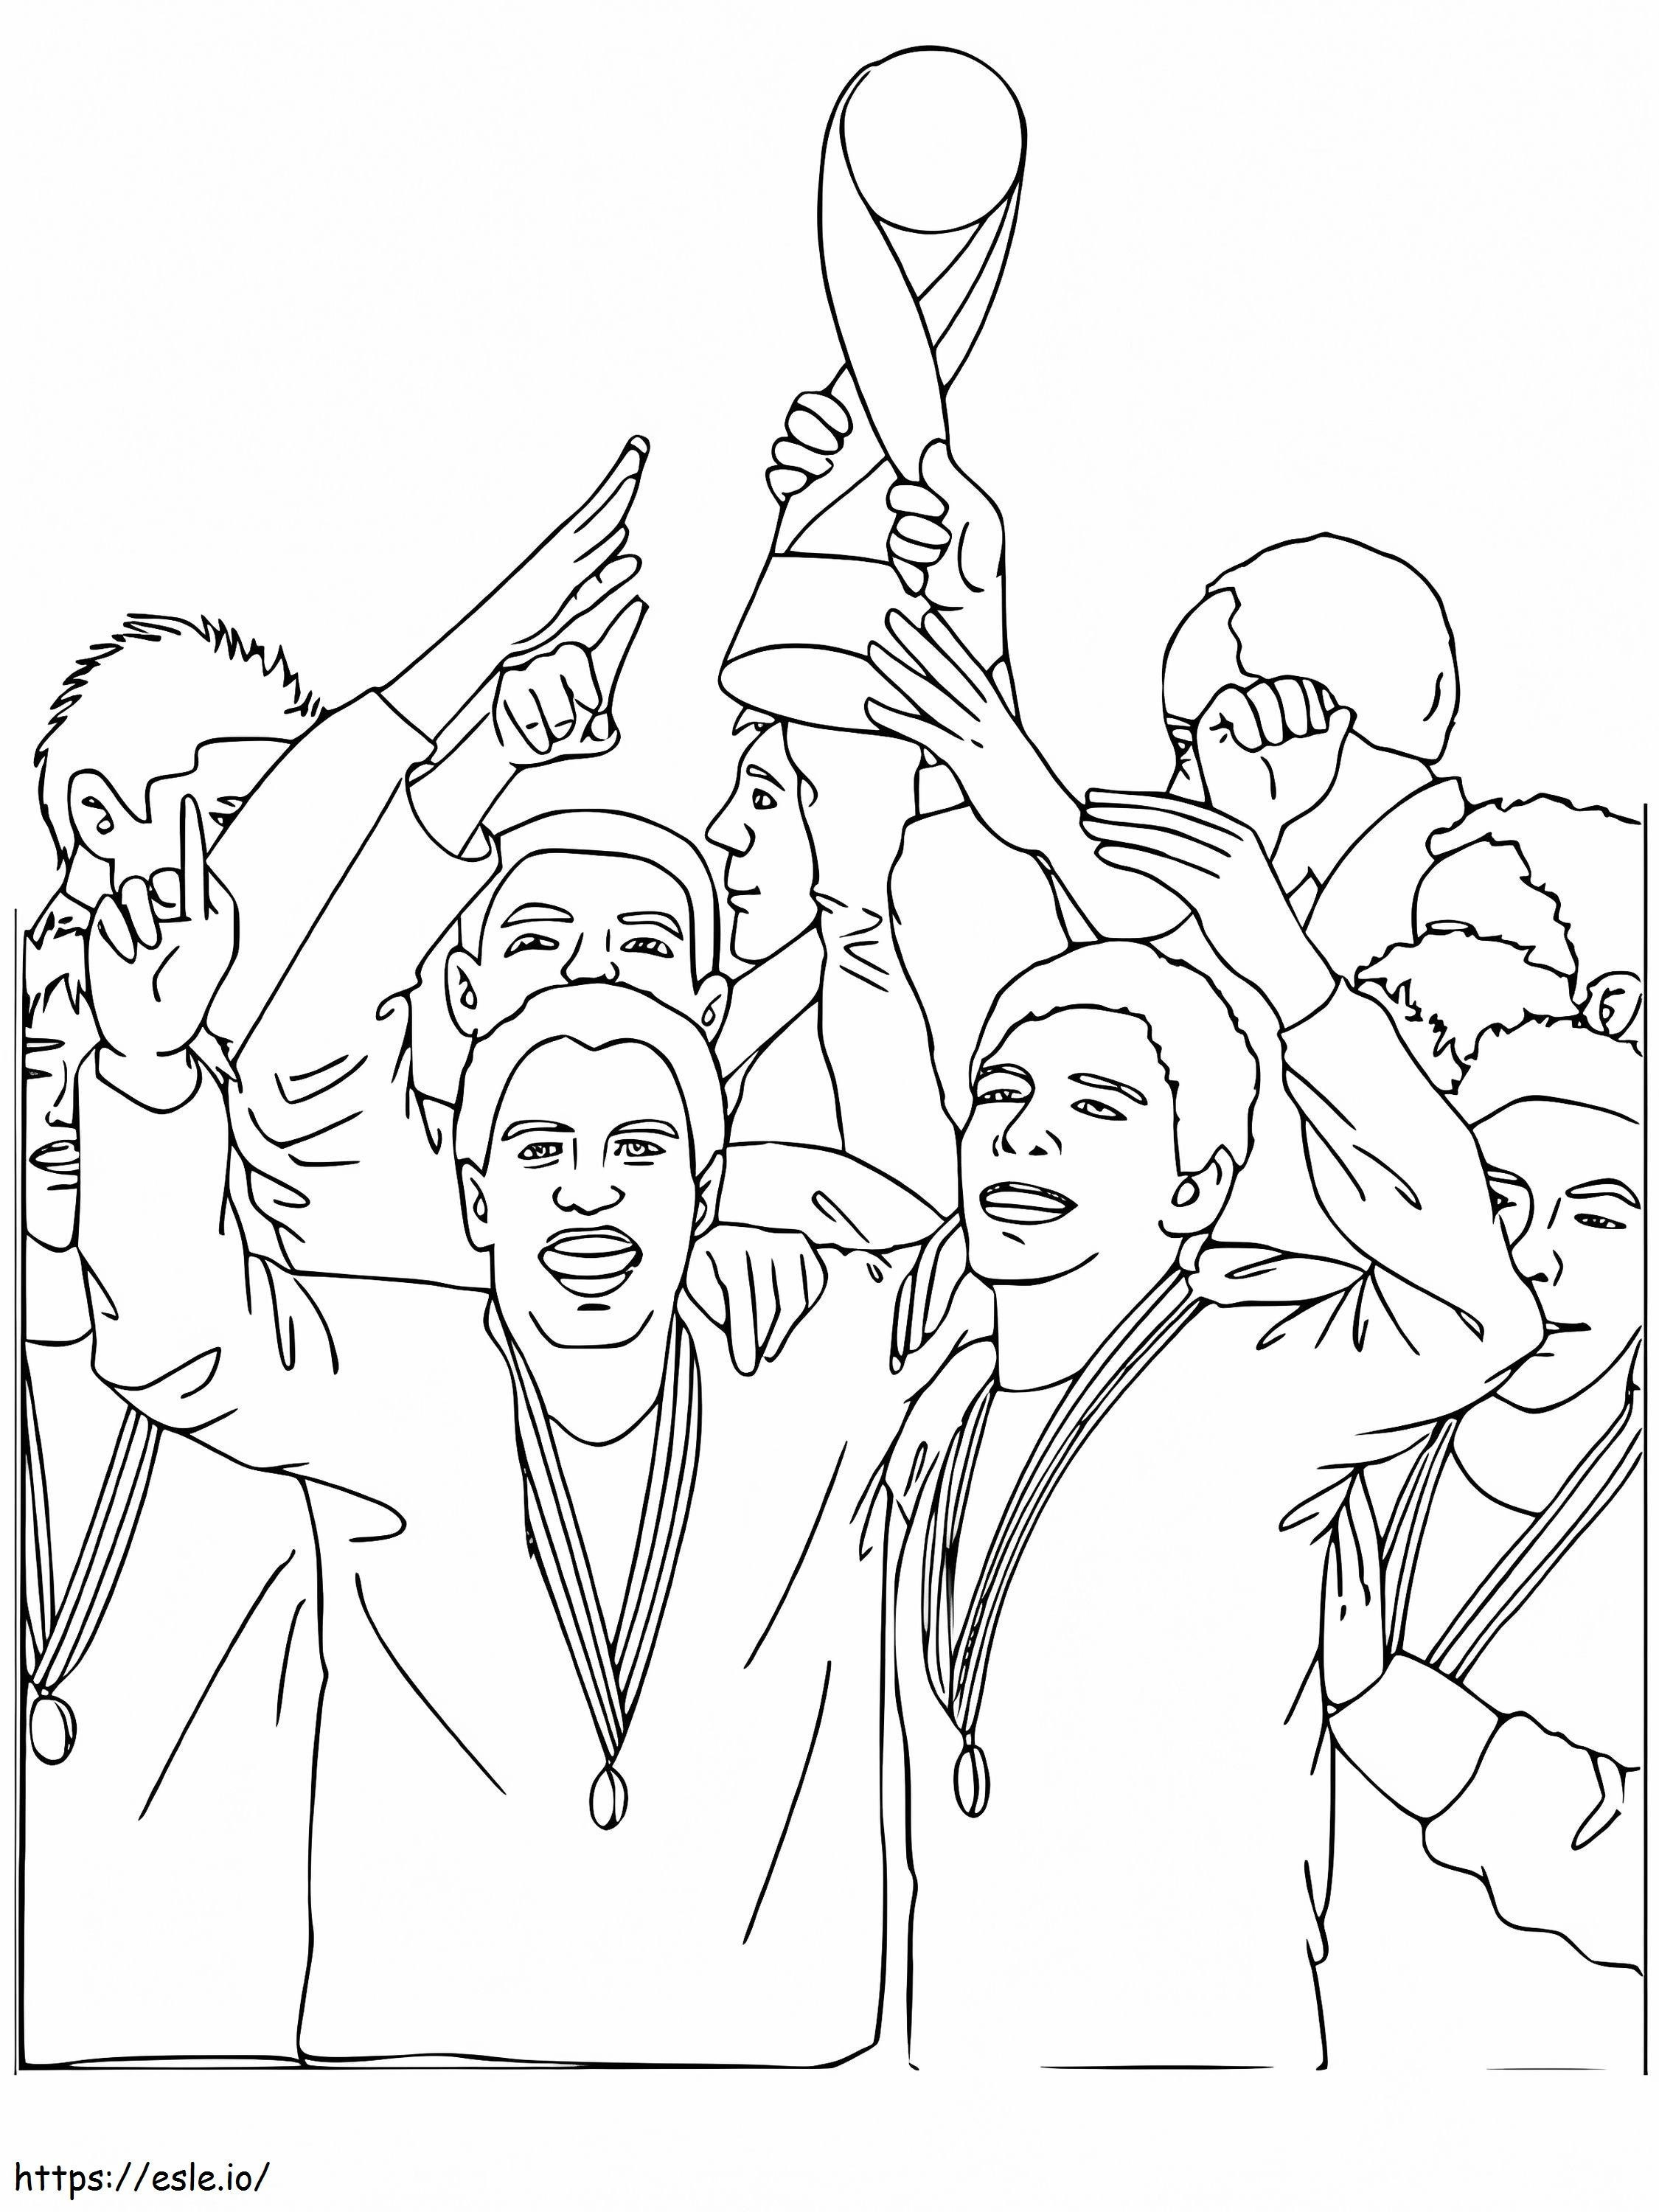 The World Cup Trophy 2 coloring page